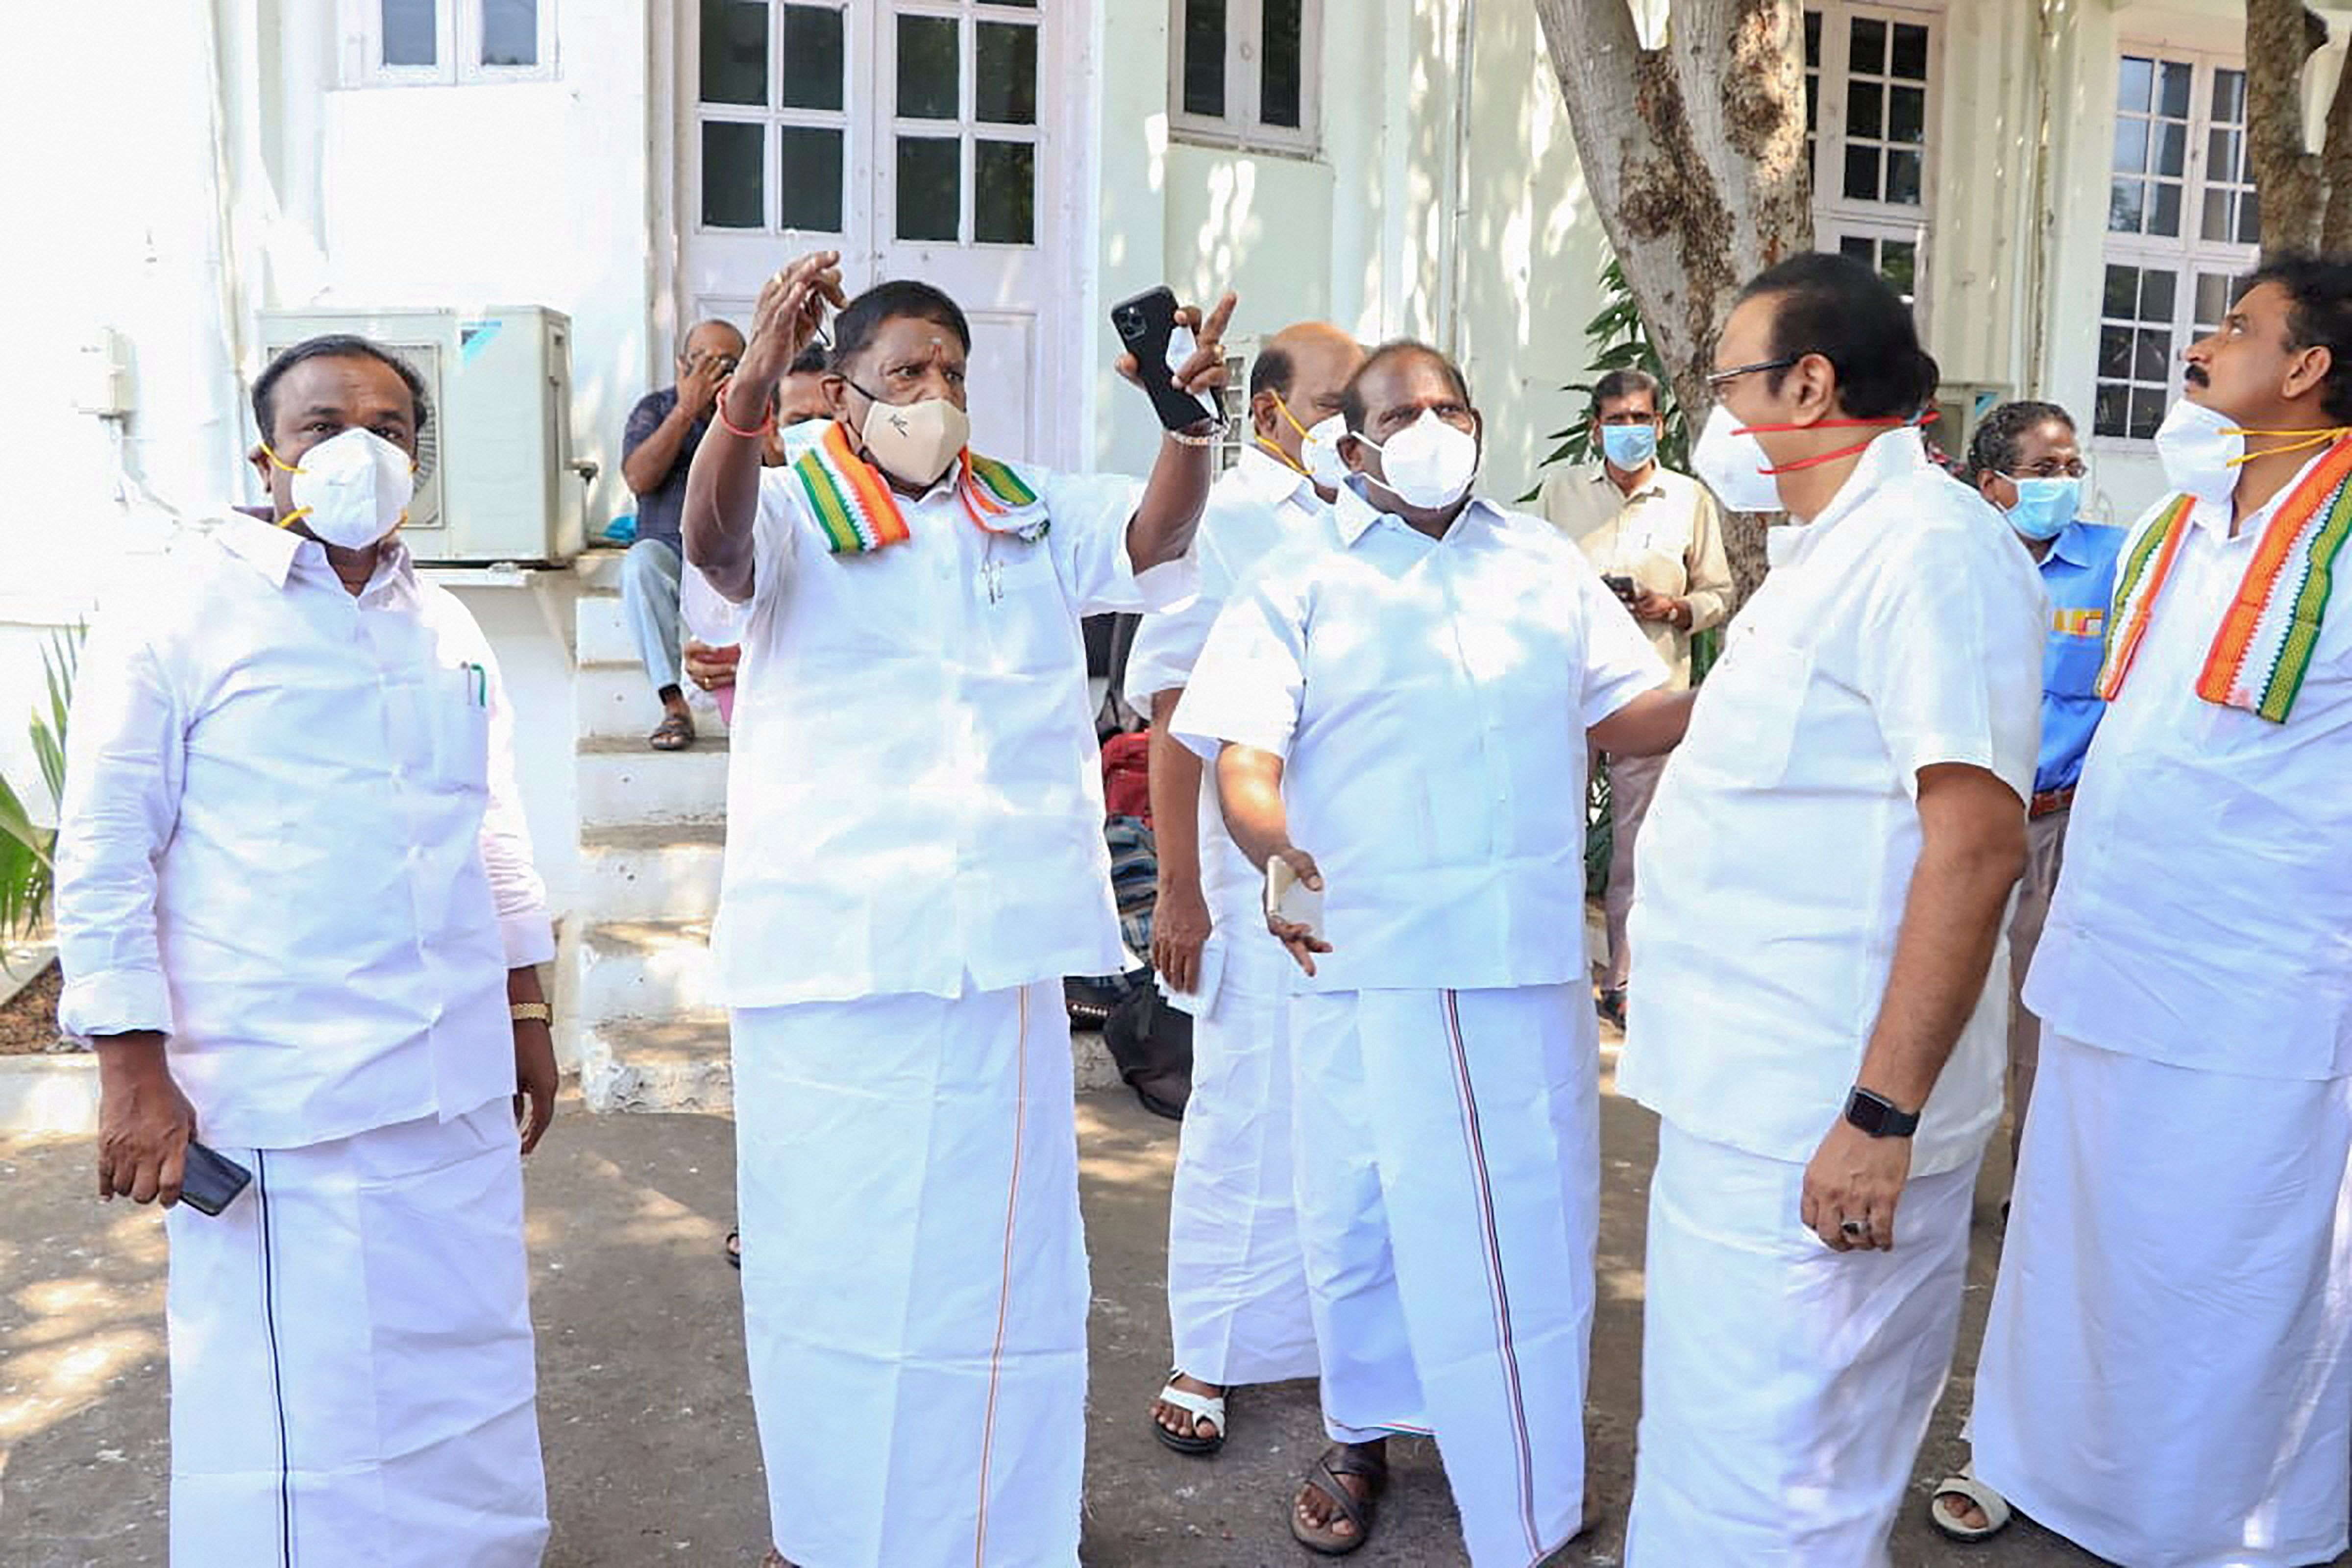 Puducherry Chief Minister V Narayayanasamy (2nd L) with Speaker Sivakozhundu and other leaders visit the garden area of the Assembly premises to convene its session as the hall was being disinfected in the view of coronavirus pandemic, in Puducherry, Saturday, July 25, 2020. Credit: PTI Photo